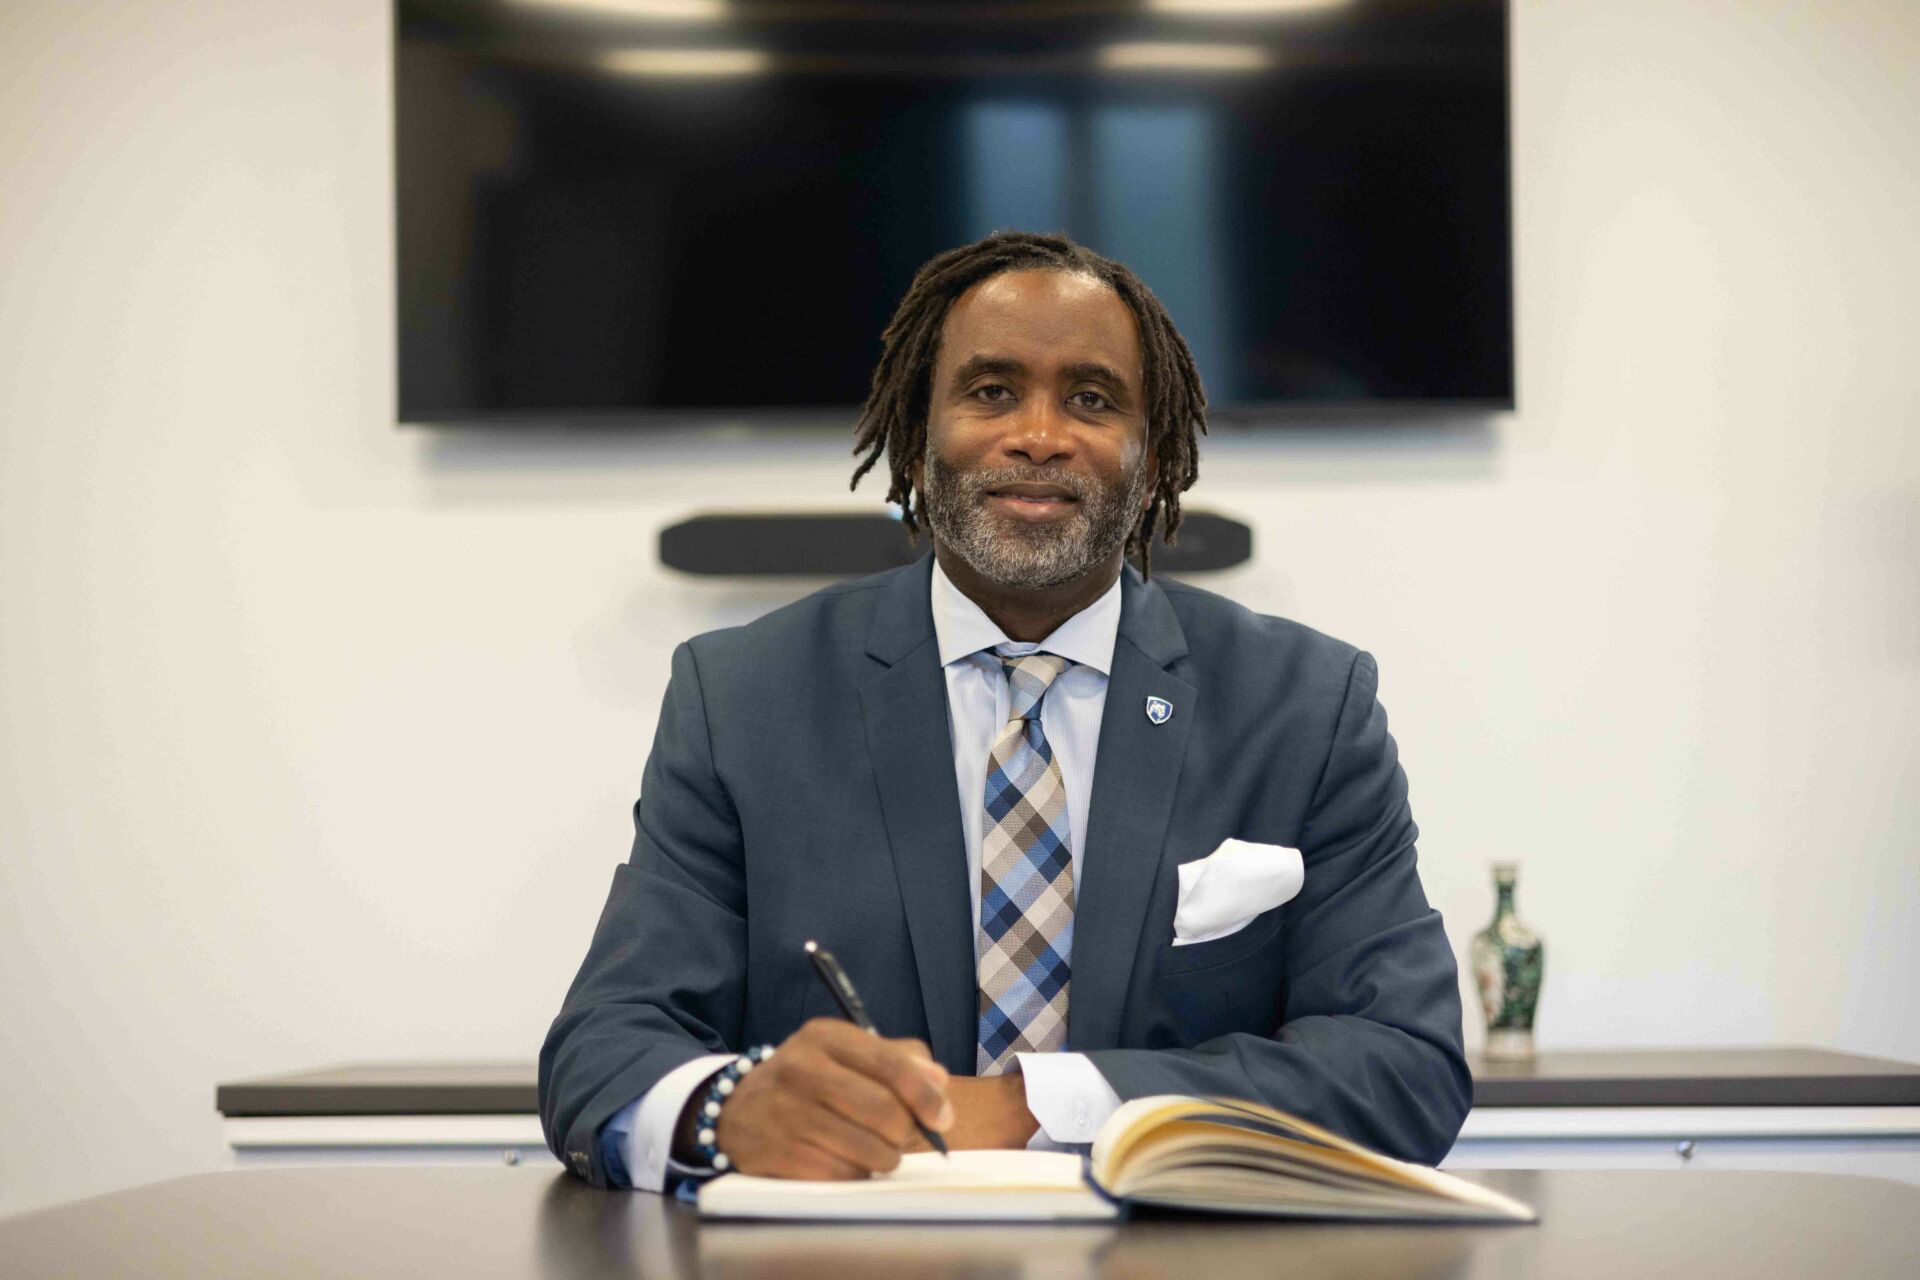 Vice Provost for Graduate Education and Dean of the Graduate School, Levon Esters, writes in a notebook in his office